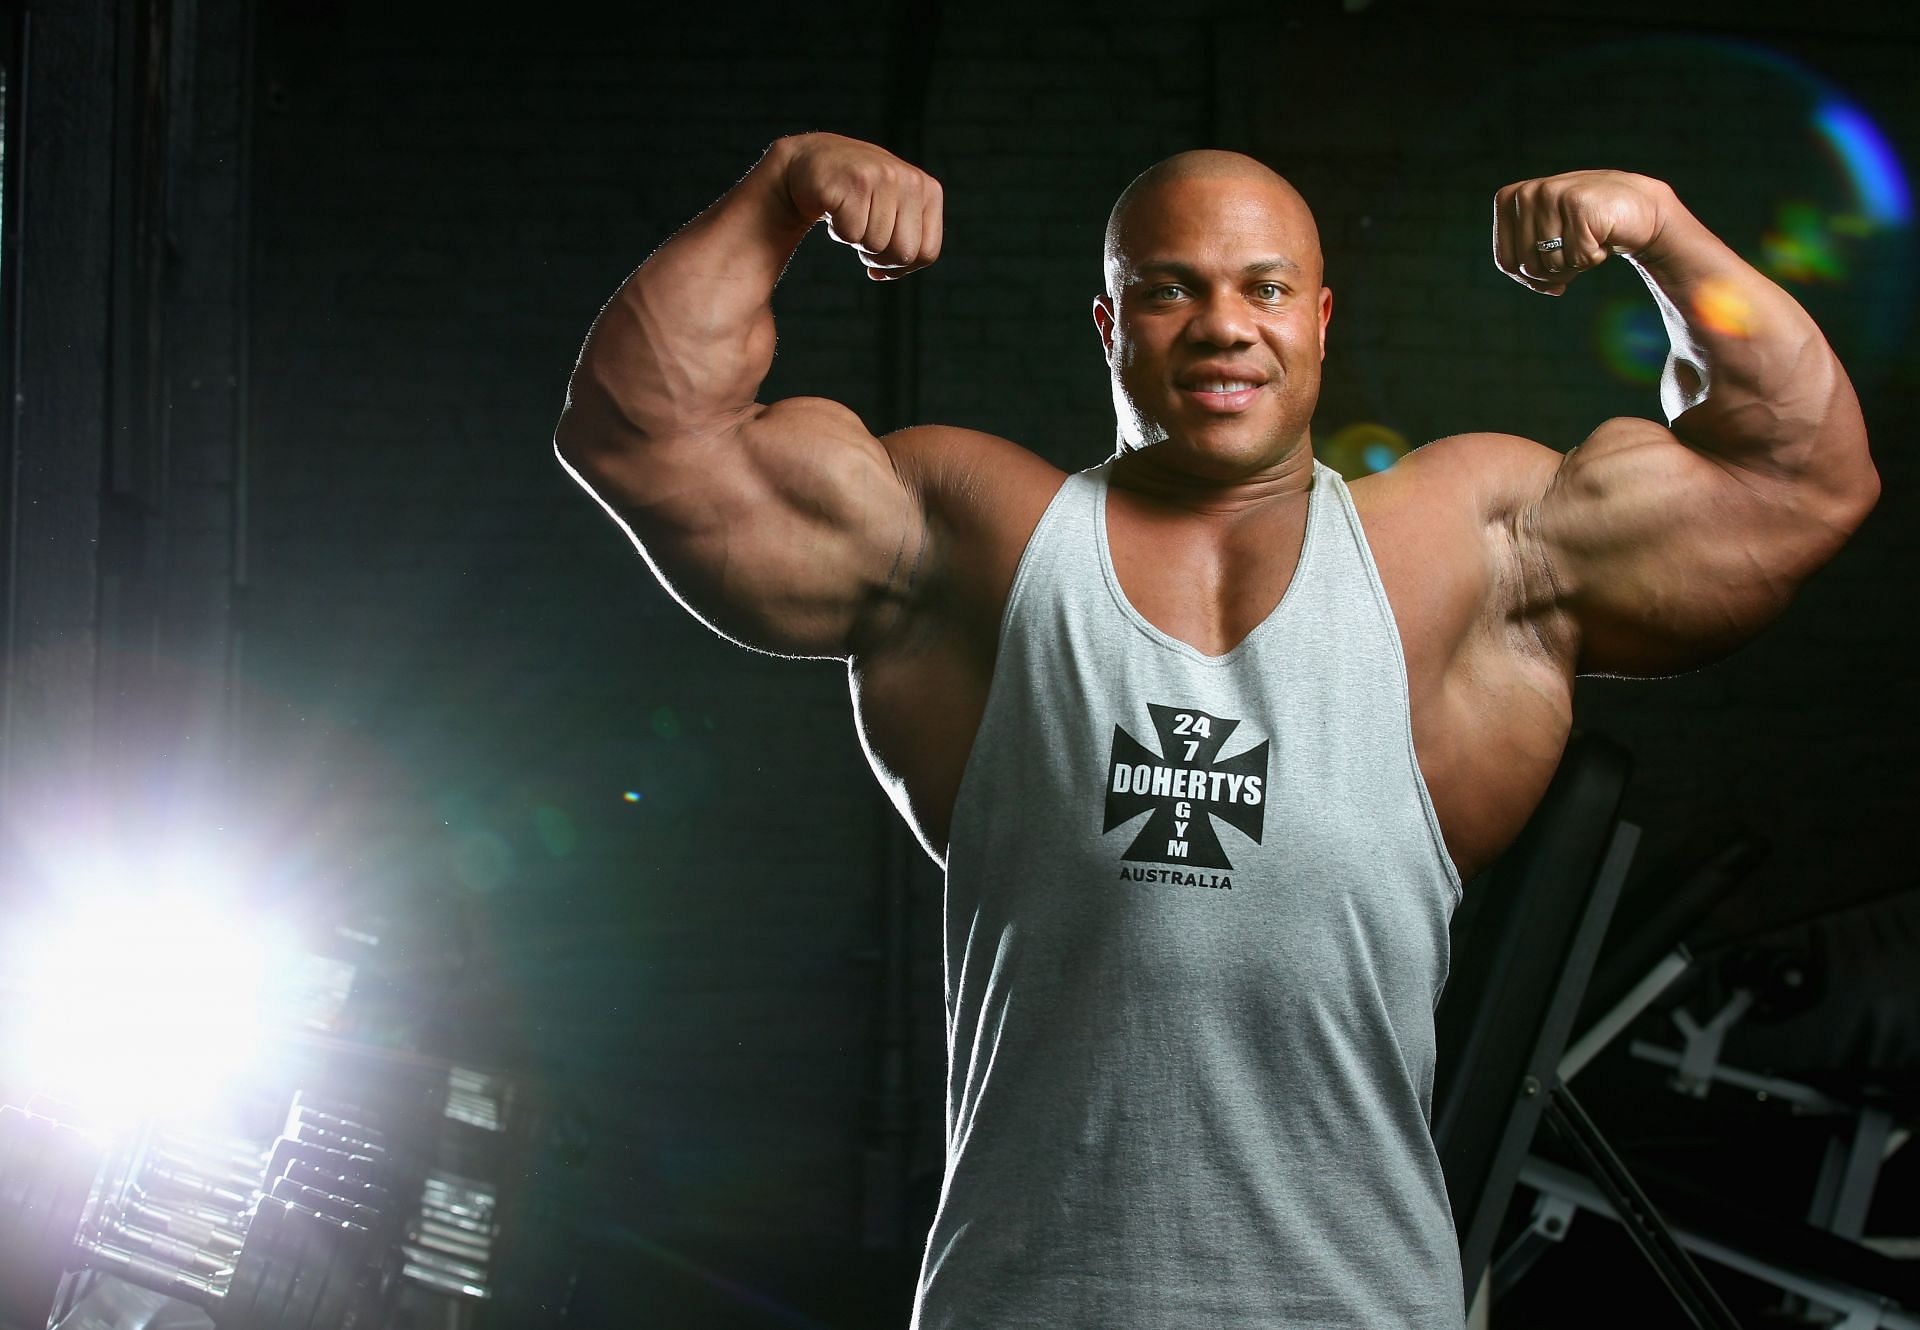 Heath at the 2012 IFBB Australian Pro Grand Prix XIII - Media Call (Photo by Robert Cianflone/Getty Images)